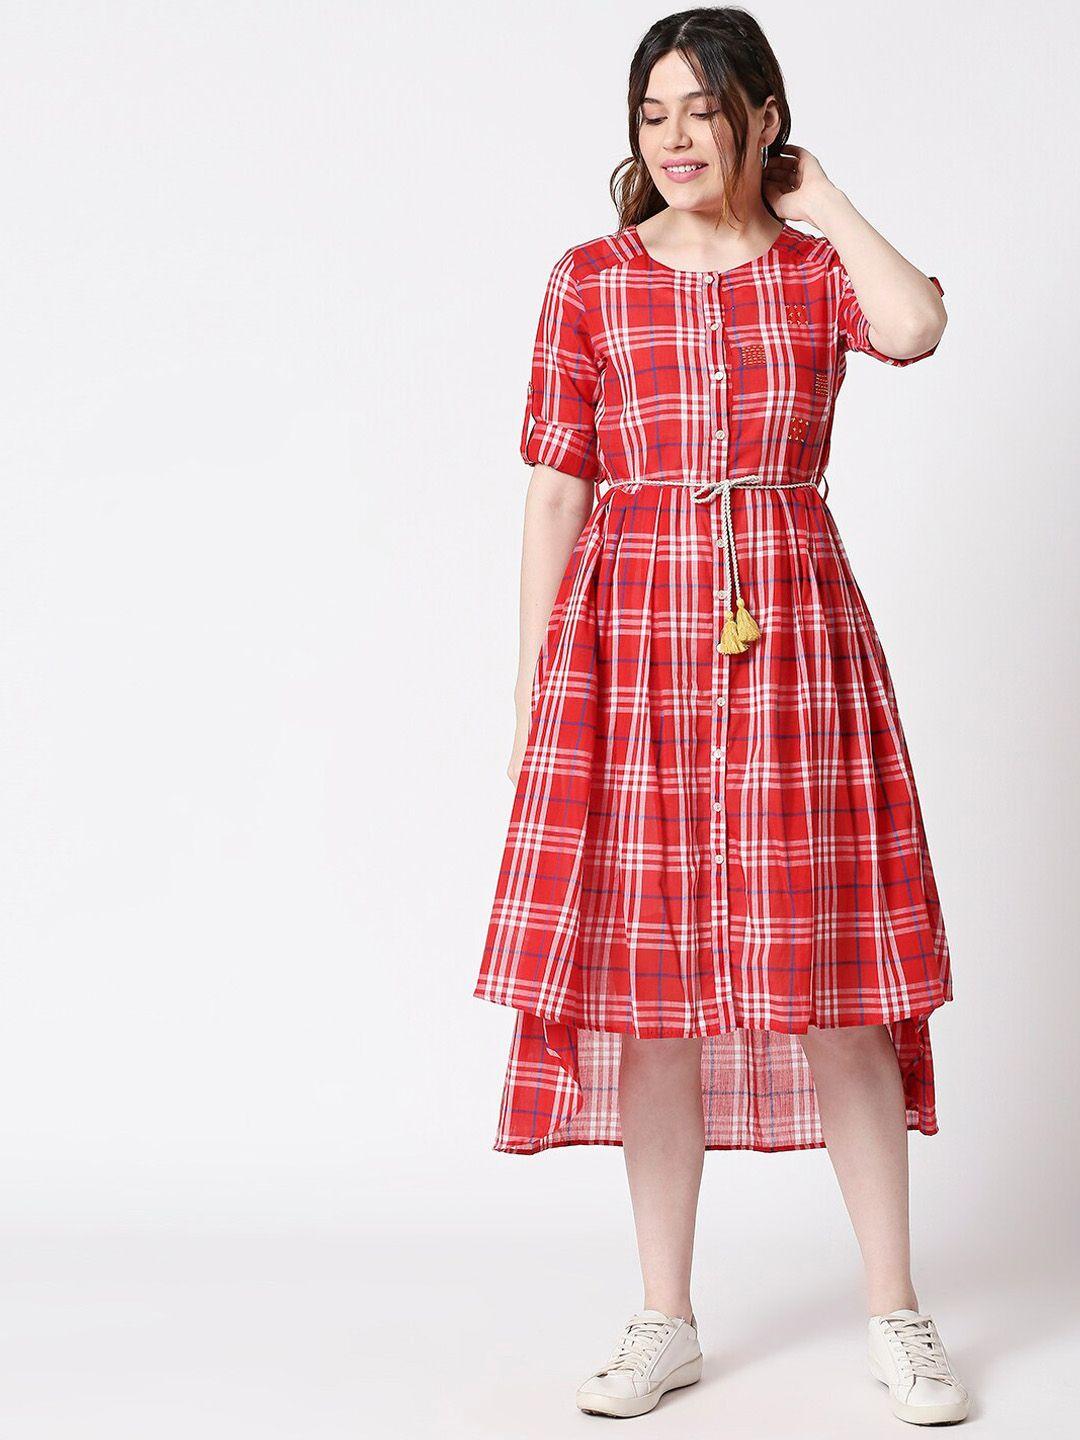 terquois-women-red-checked-a-line-dress